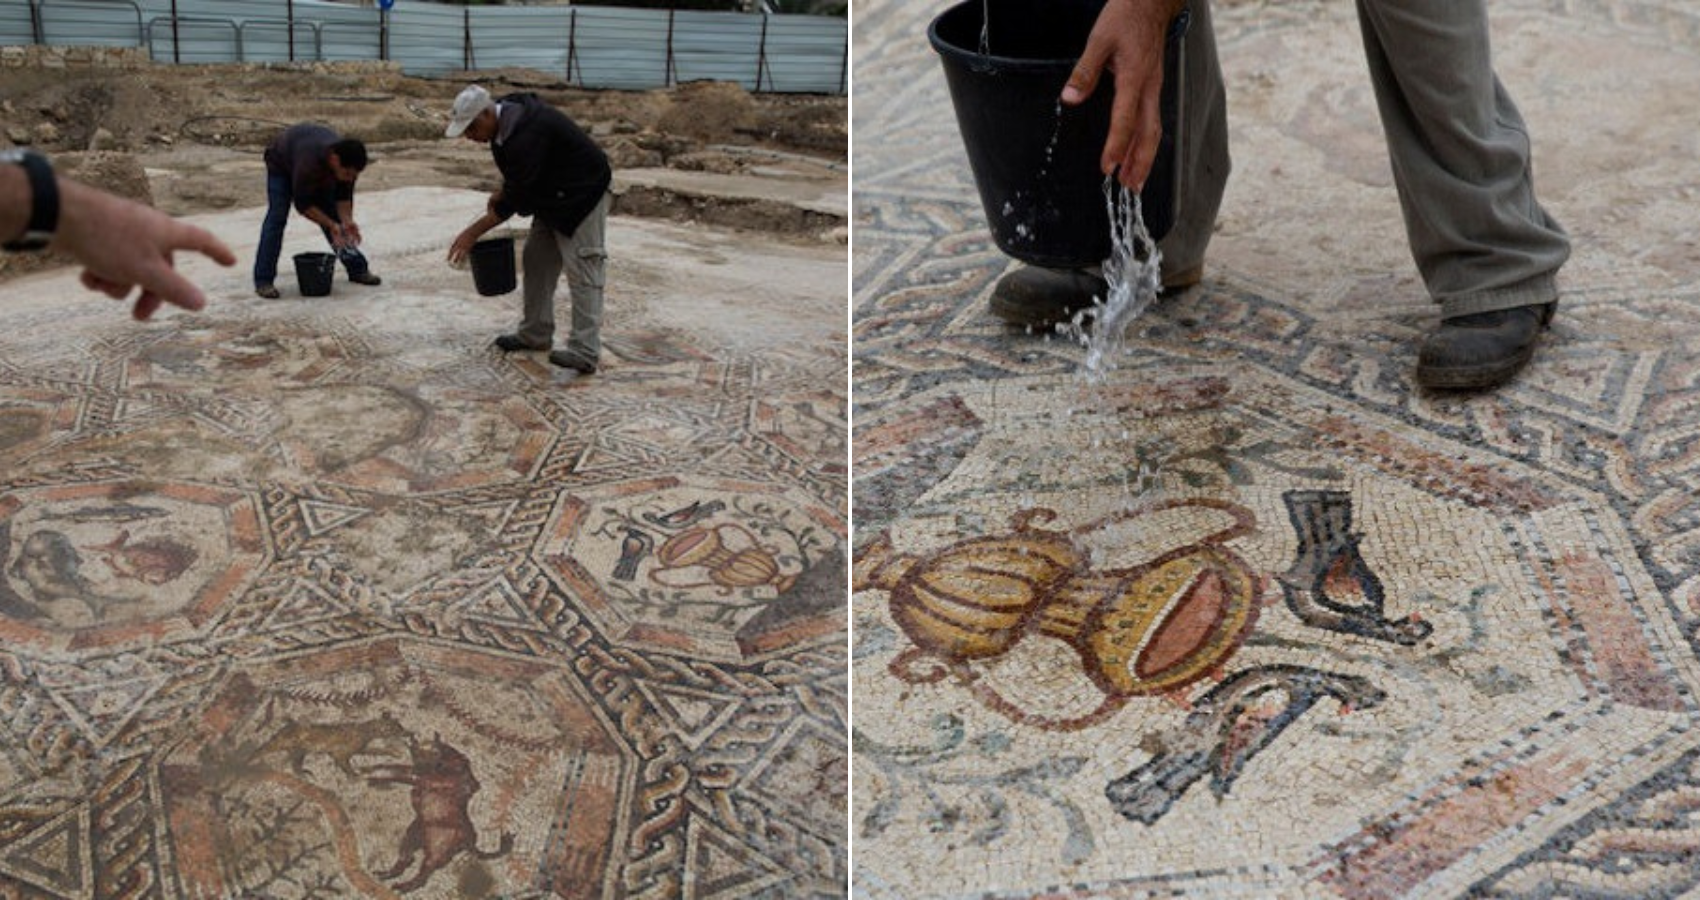 1,700-Year-Old Roman Mosaic Discovered During City Sewer Construction Project